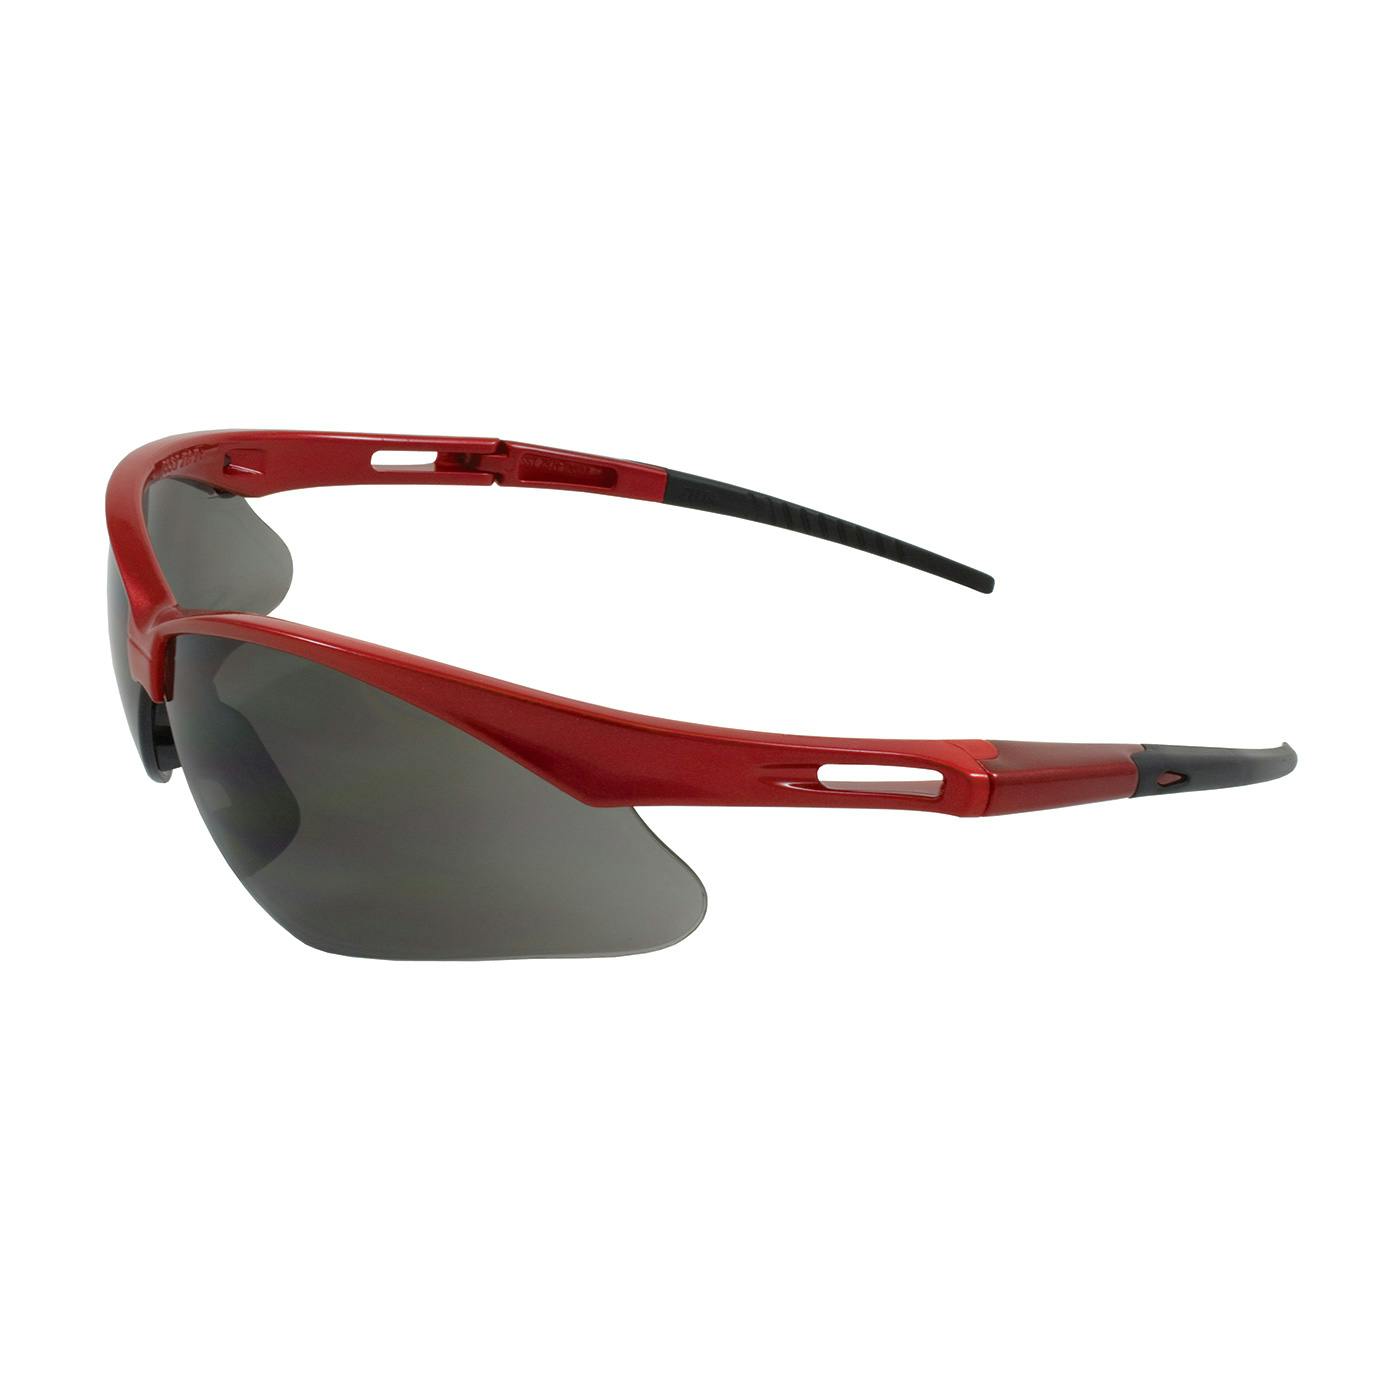 Semi-Rimless Safety Glasses with Red Frame, Gray Lens and Anti-Scratch Coating, Red (250-AN-10117) - OS_1